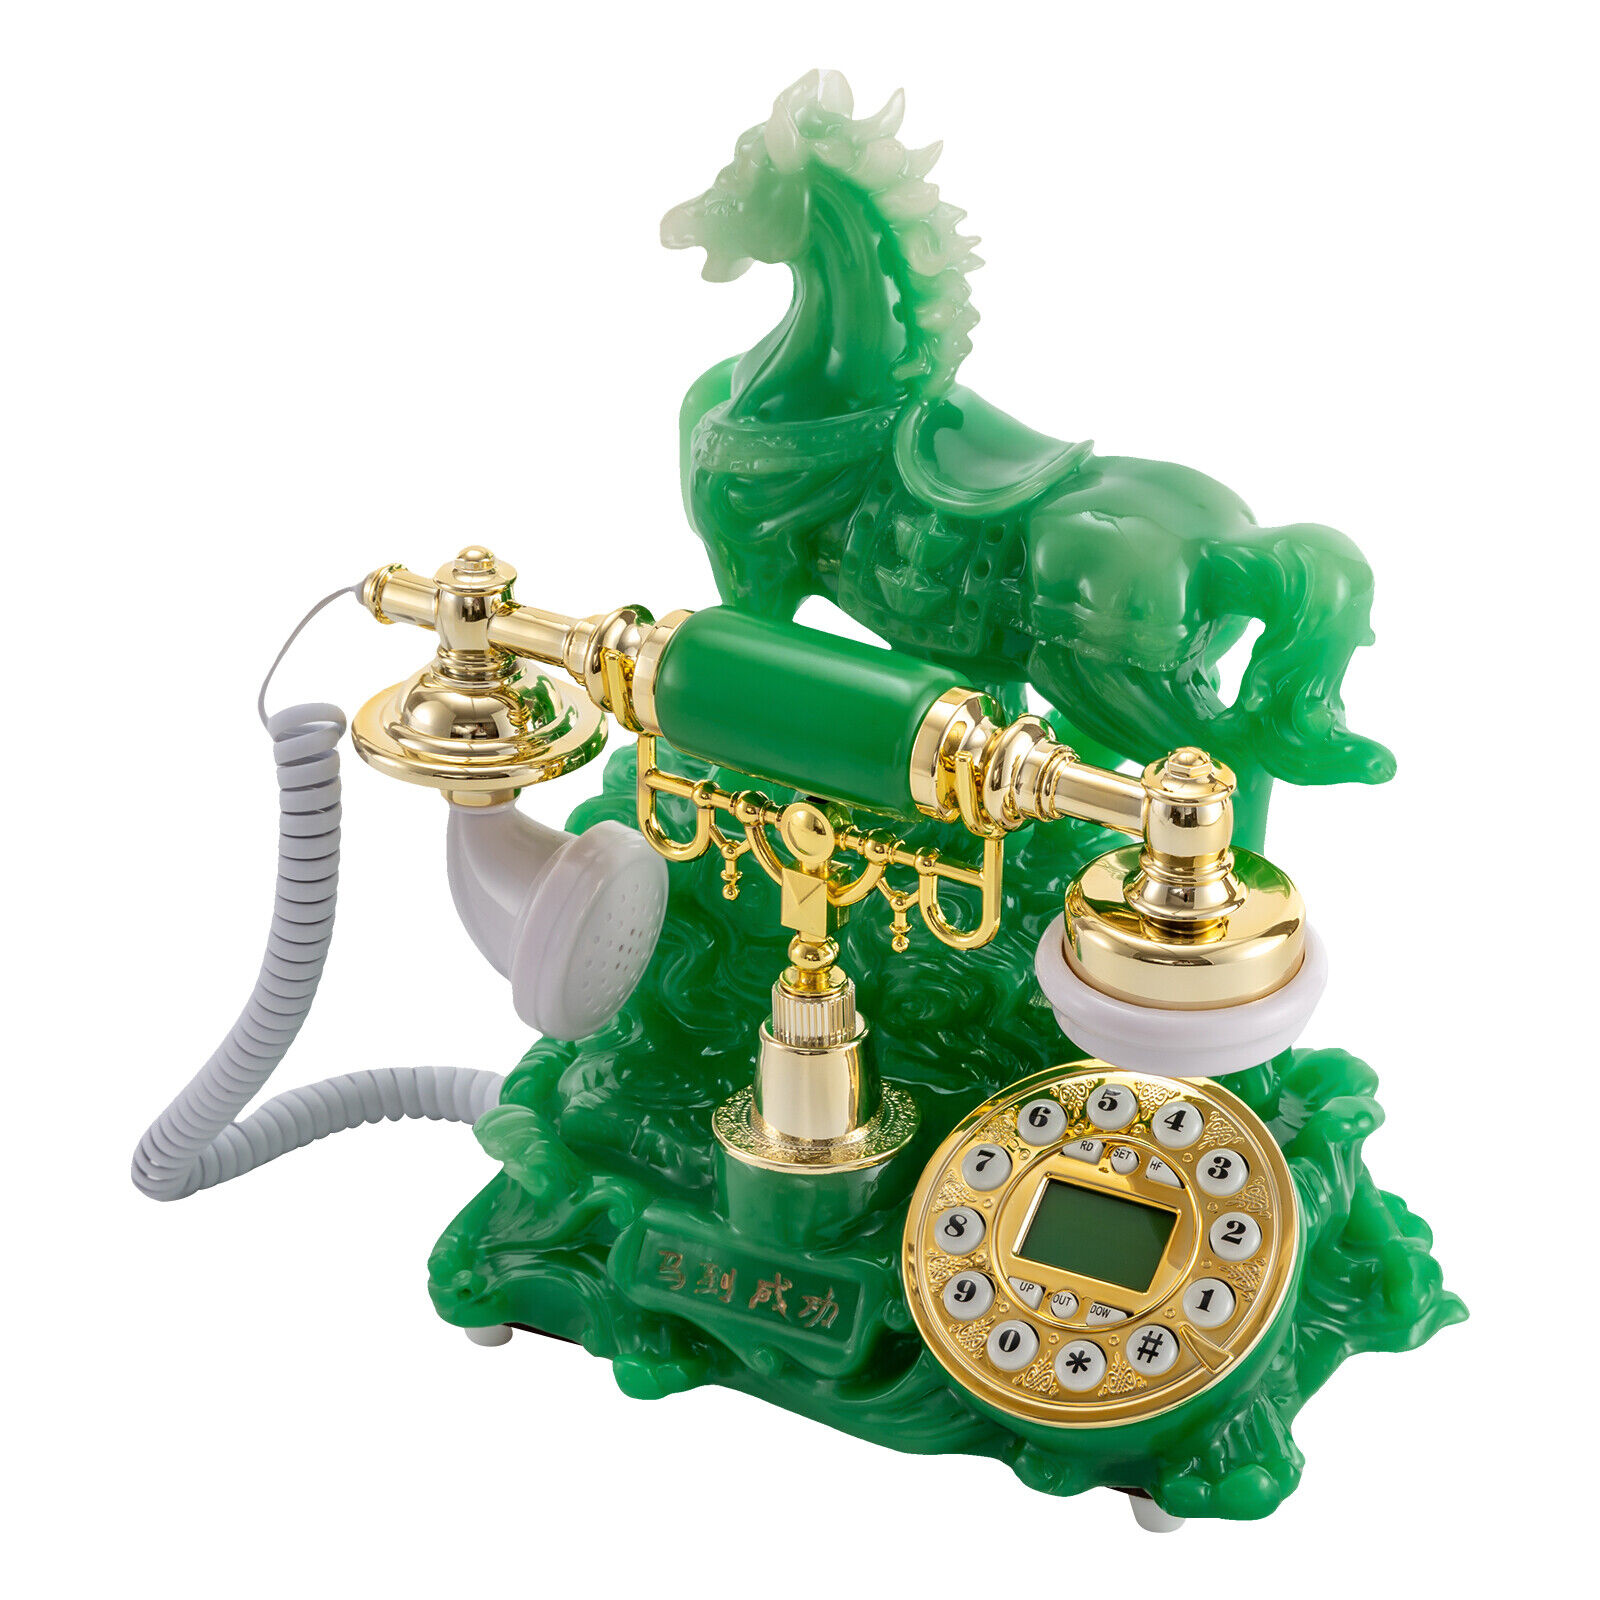 Retro Horse Design Telephone Dial Corded Phone Exquisite Workmanship Green Unbranded Does not apply - фотография #9